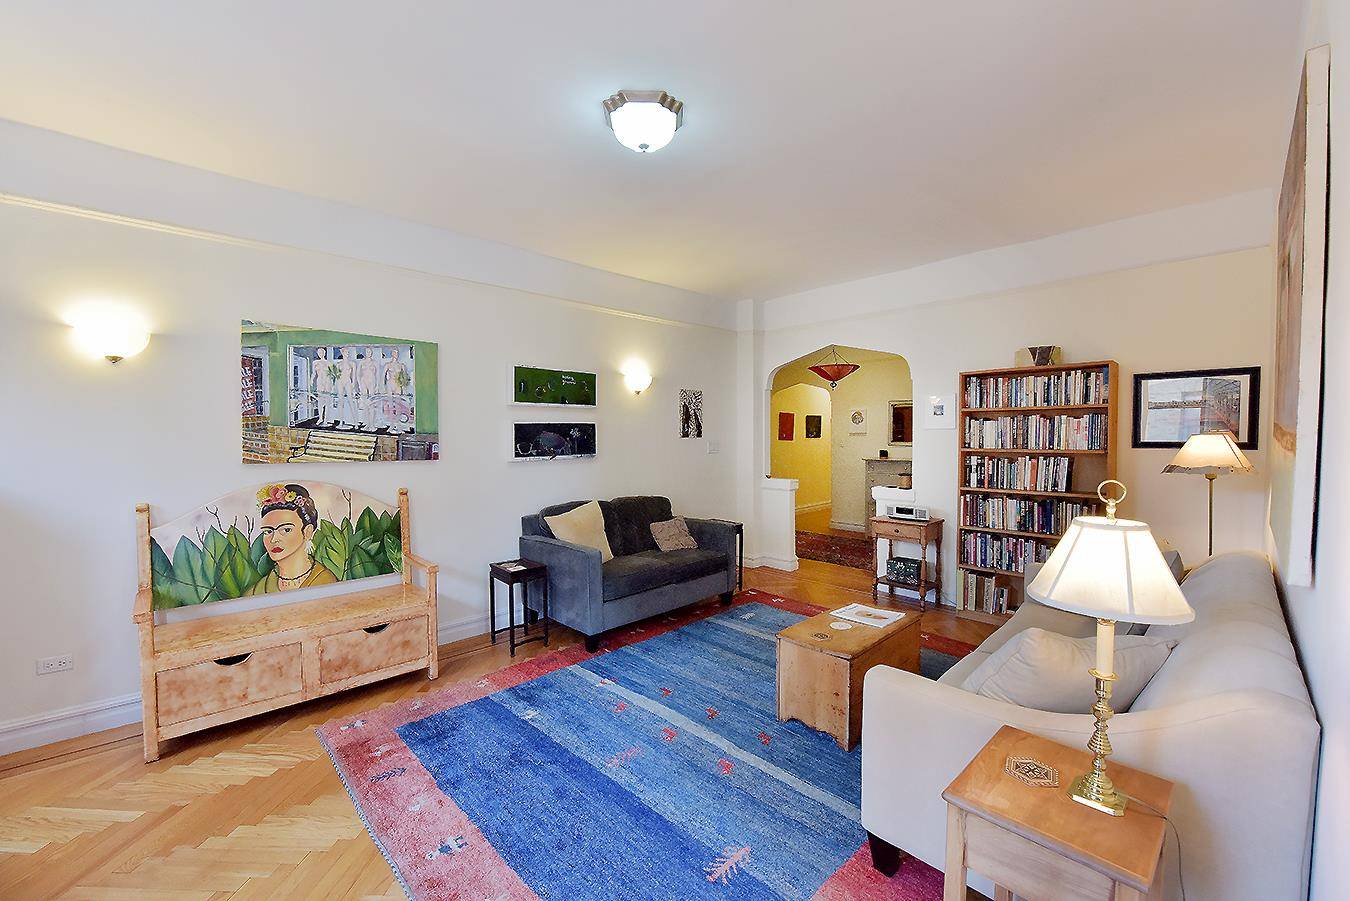 Sunny Junior 4 One Block from Inwood Hill Park This sun bathed corner unit in a noted Art Deco building is truly a special apartment.